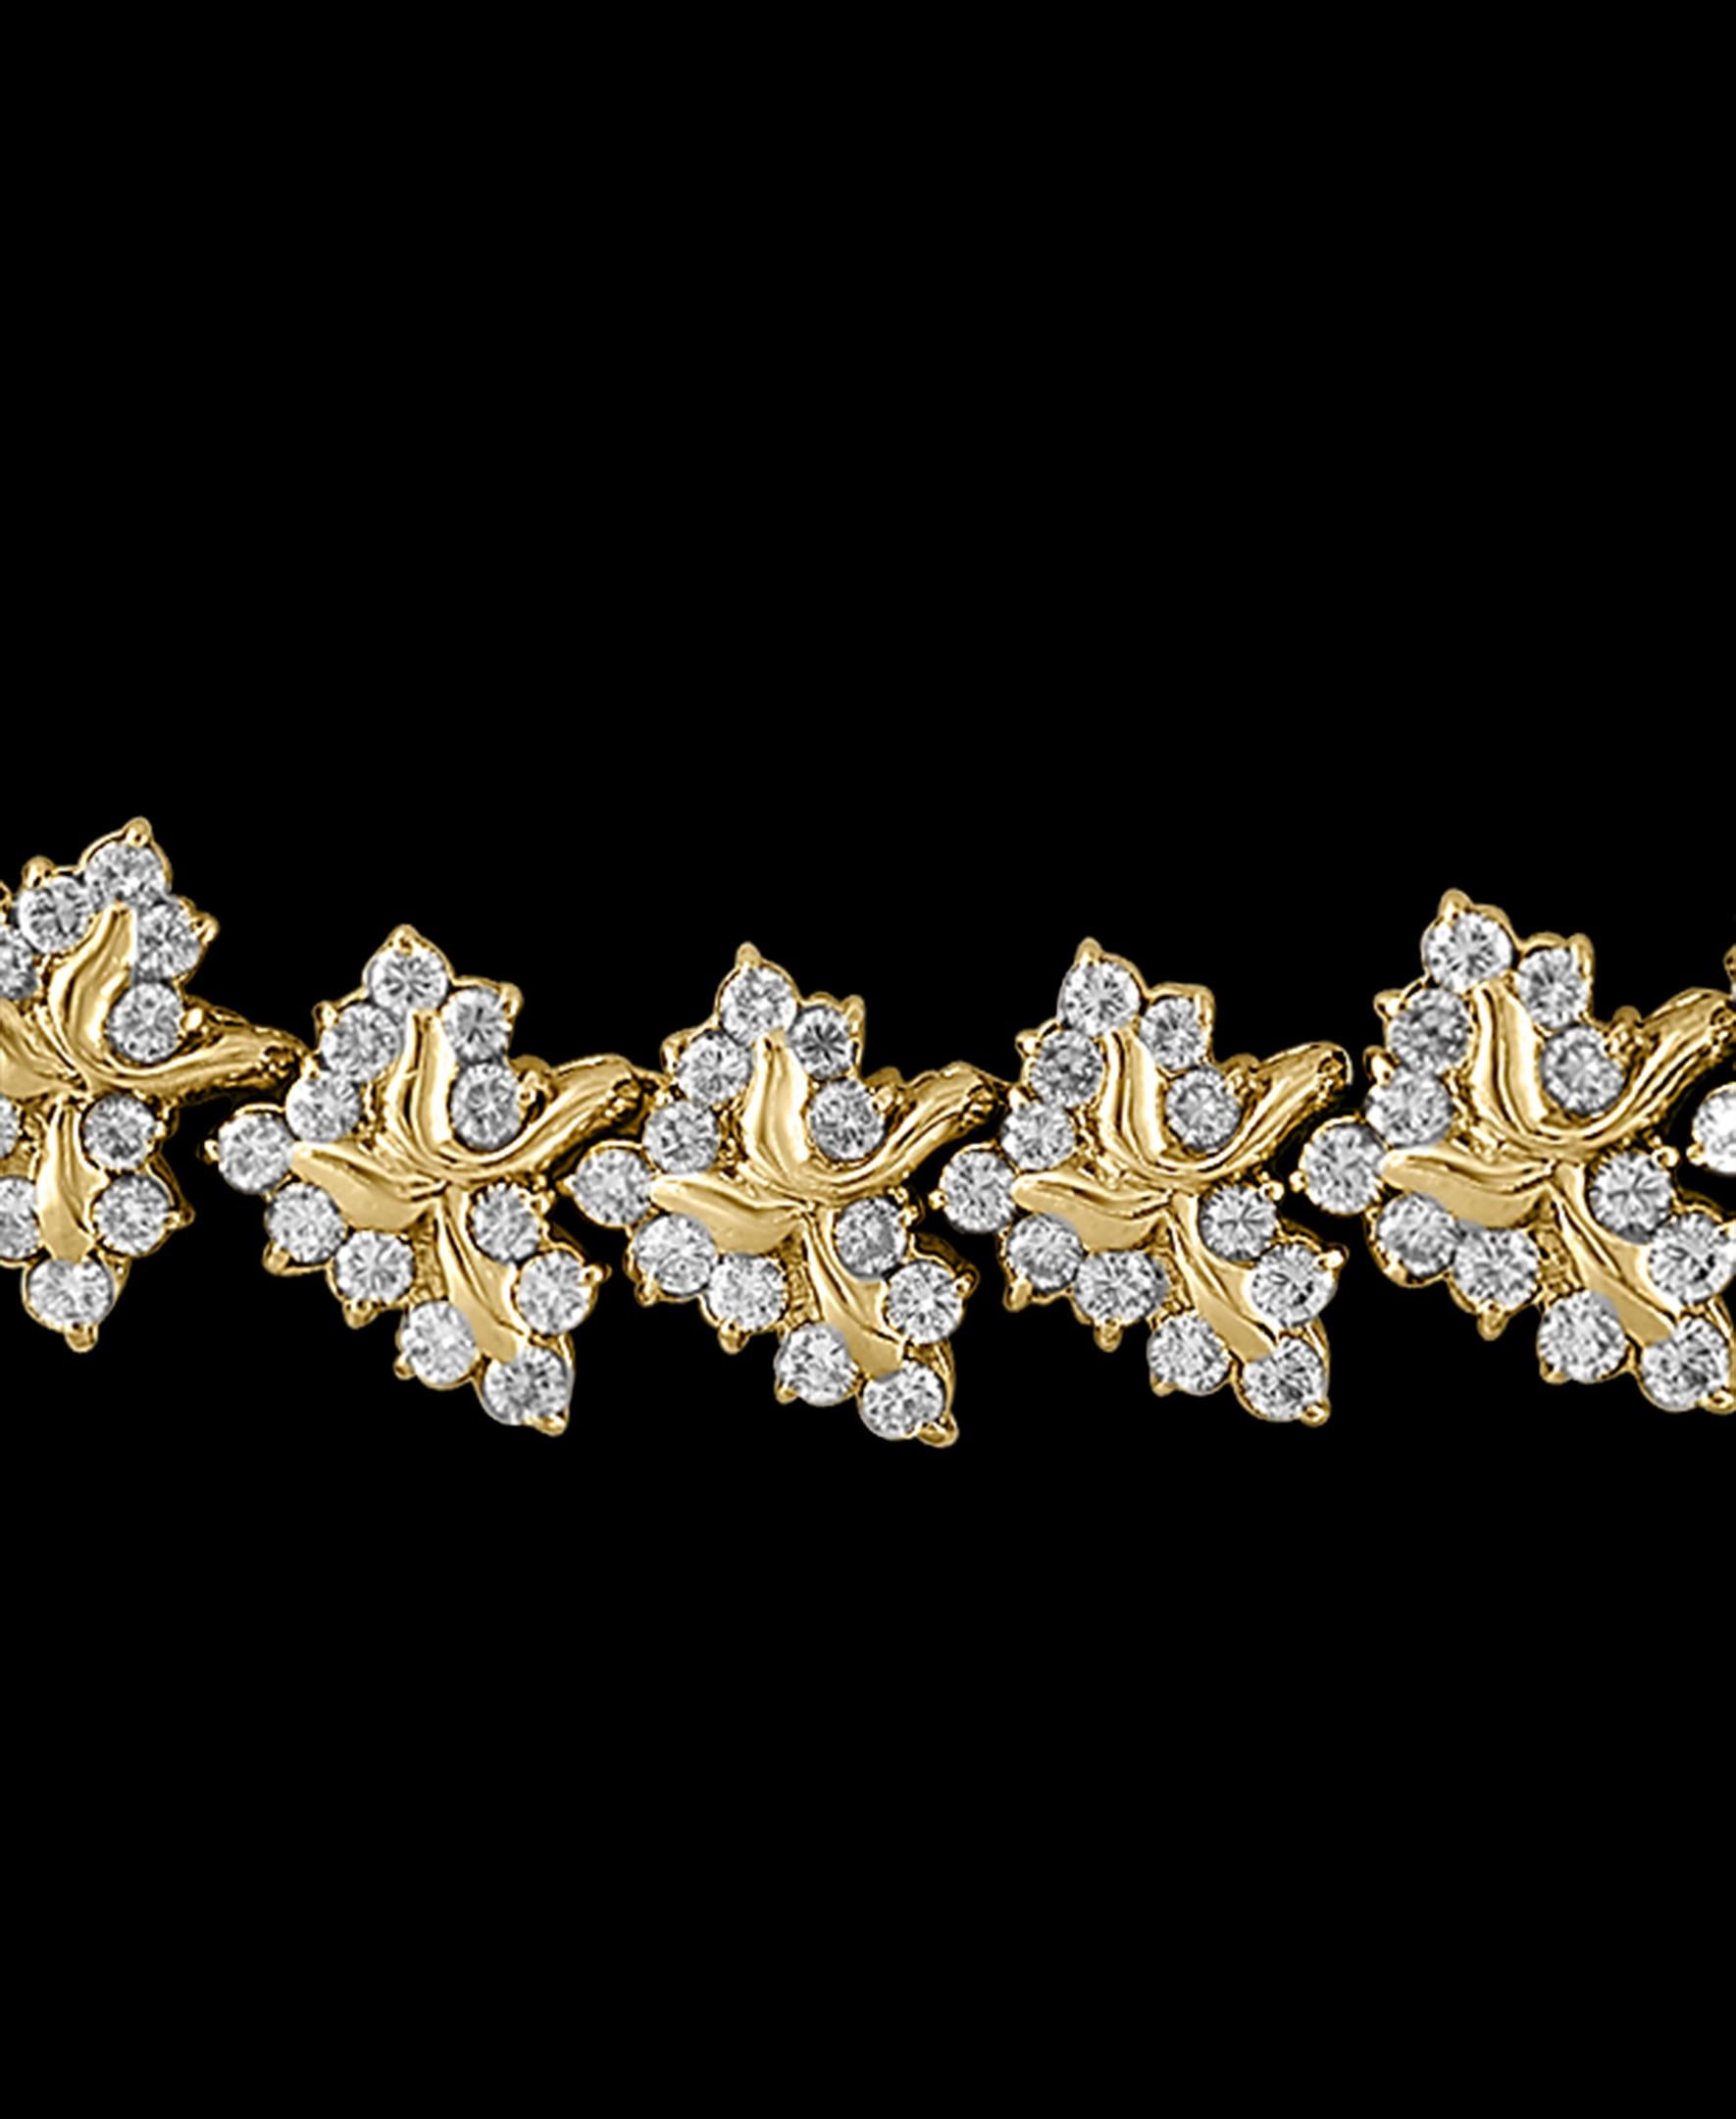 38 Carat Diamond Necklace and Bracelet 180 Grams 14 Karat Gold Bridal Suite In Excellent Condition For Sale In New York, NY